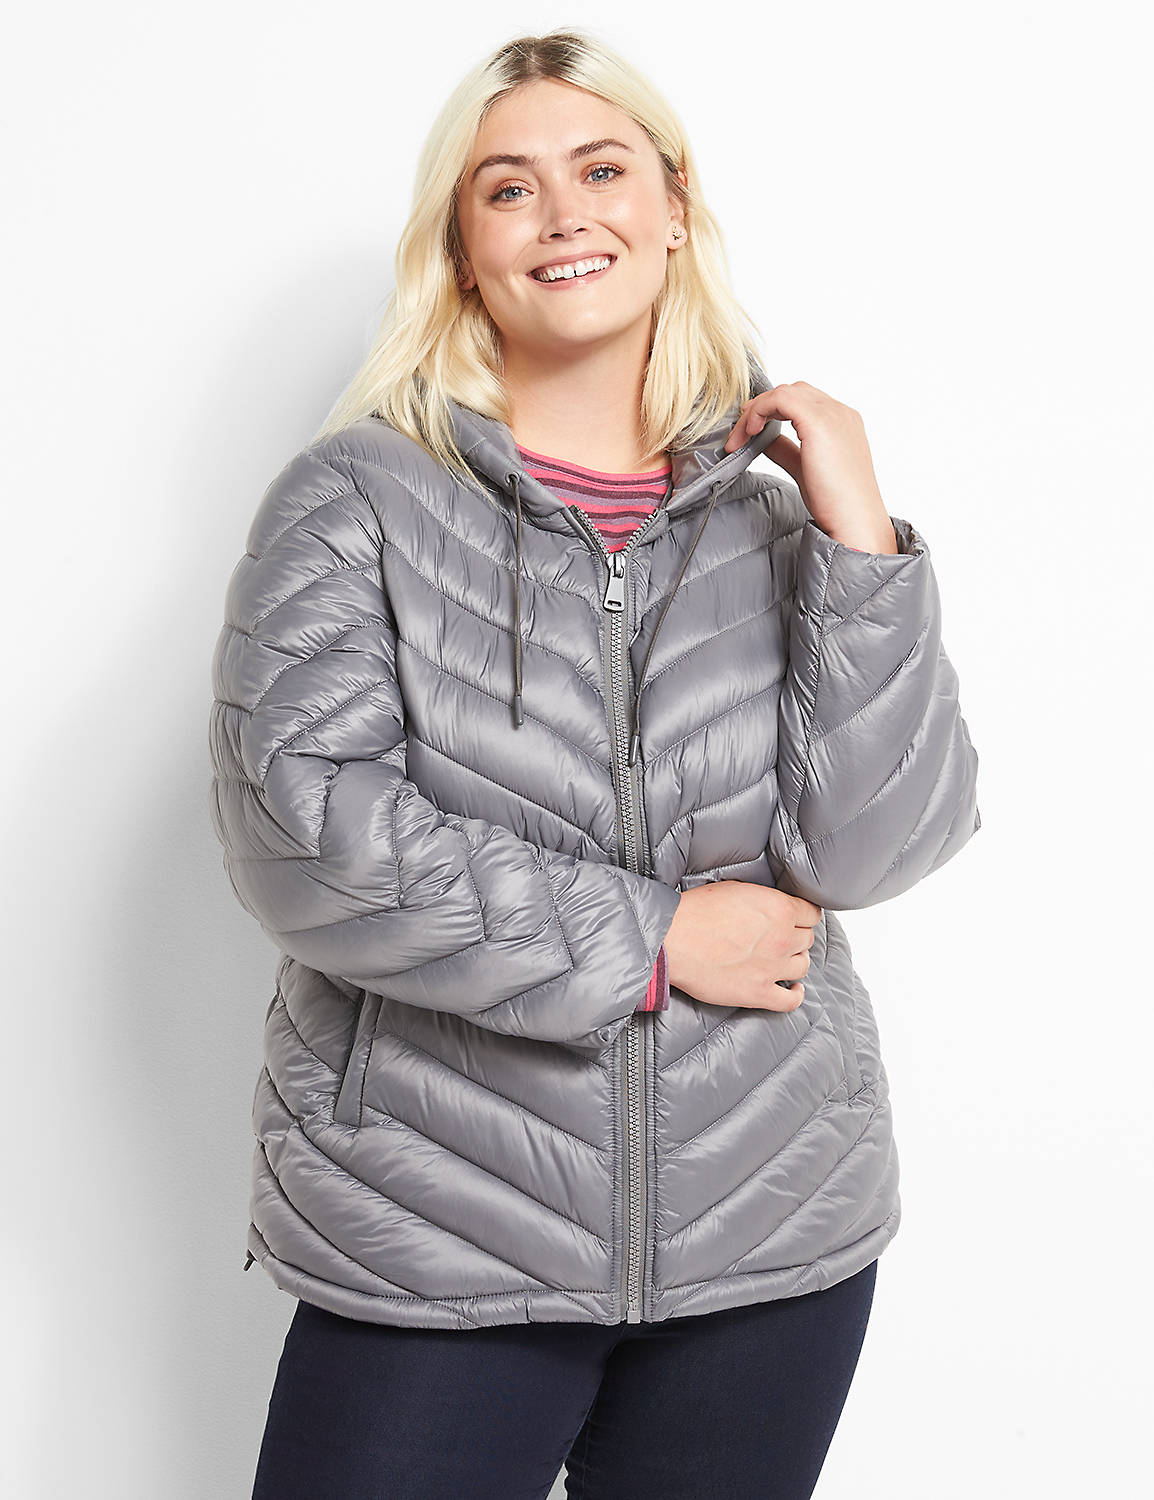 Packable Puffer 1123314 Product Image 4